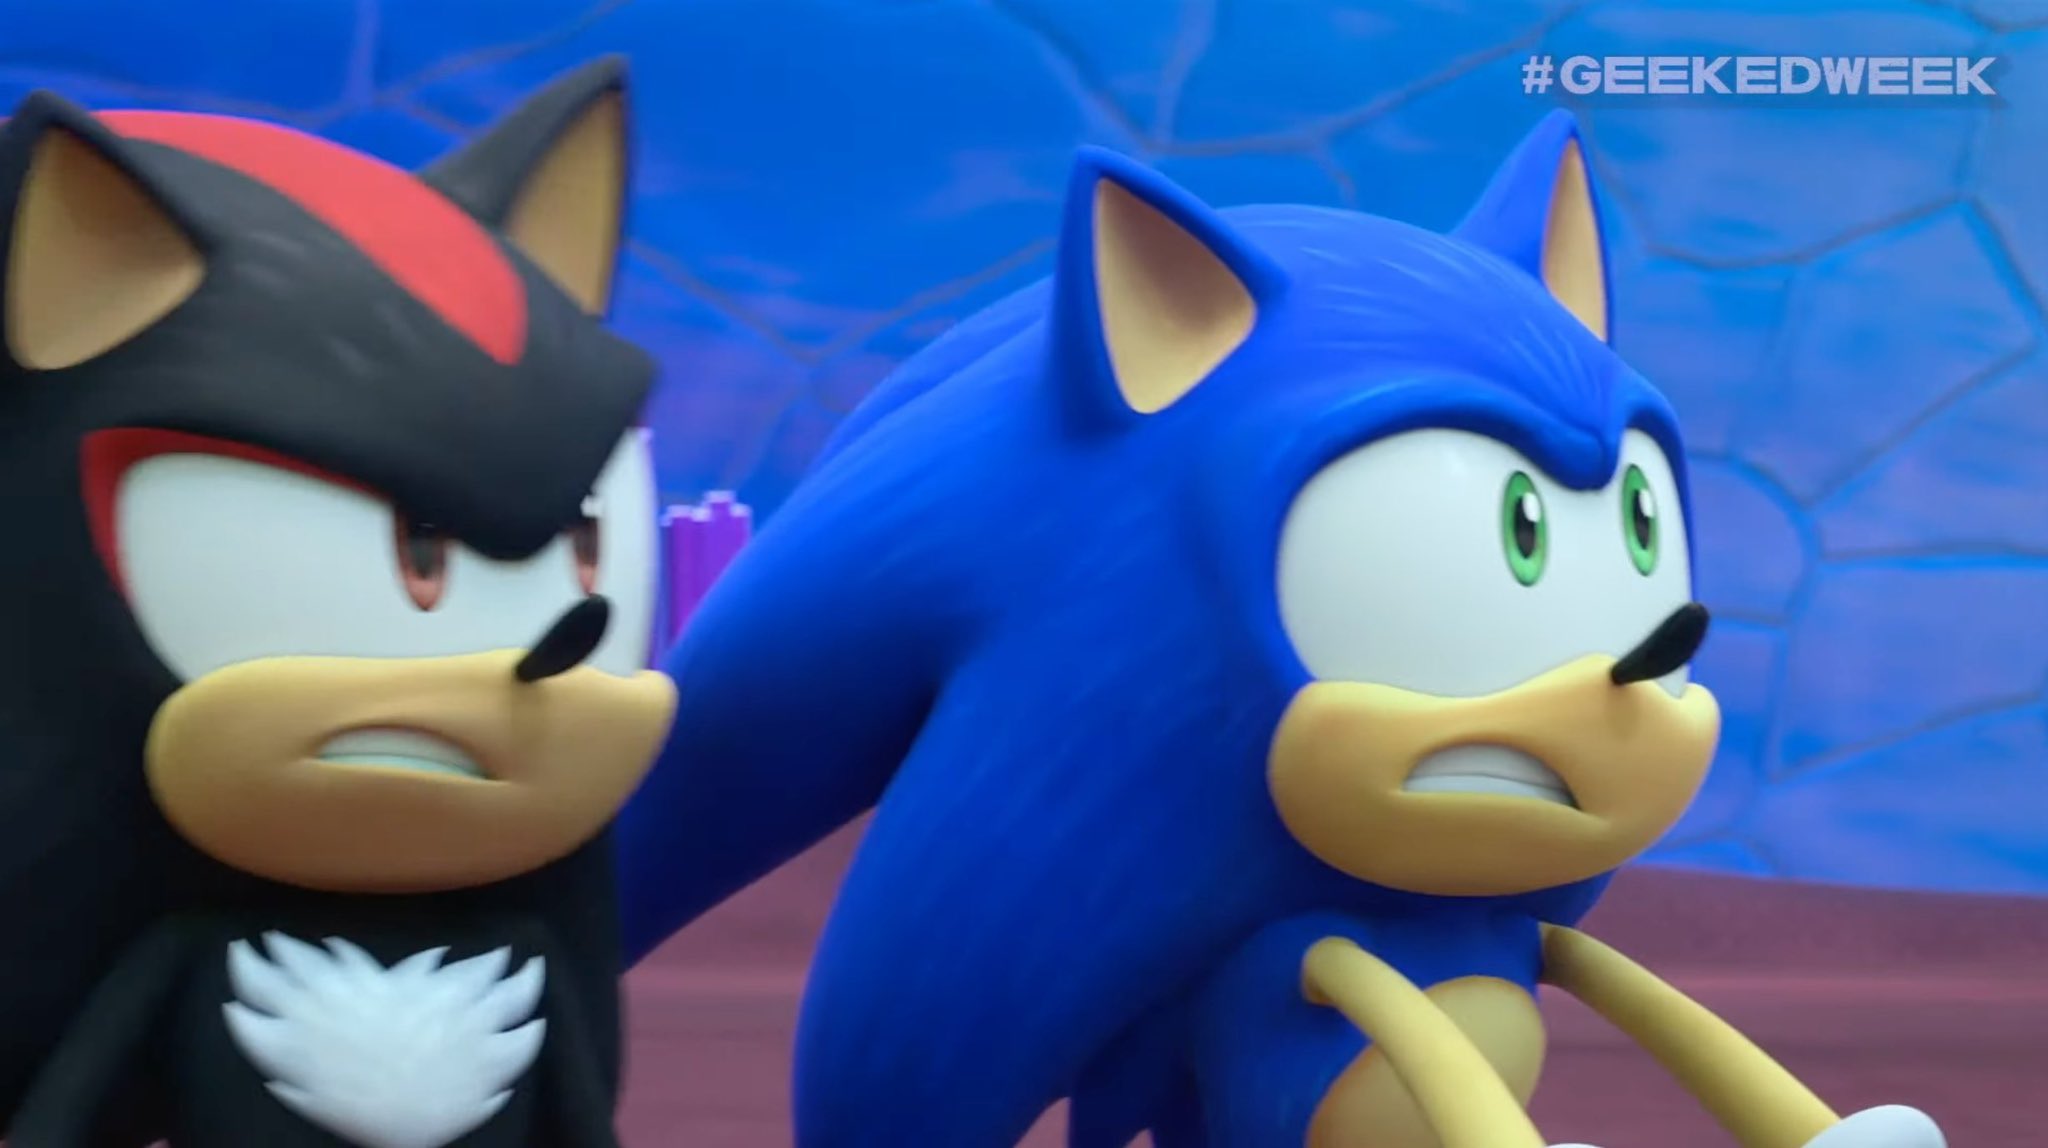 Sonic movienews on X: #sonicprime season 3 will officially return on  Netflix in January 11, 2024 Here's some new look at Sonic Prime season 3  from the Netflix Geekedweek 23 livestream 👀🔥💙 #